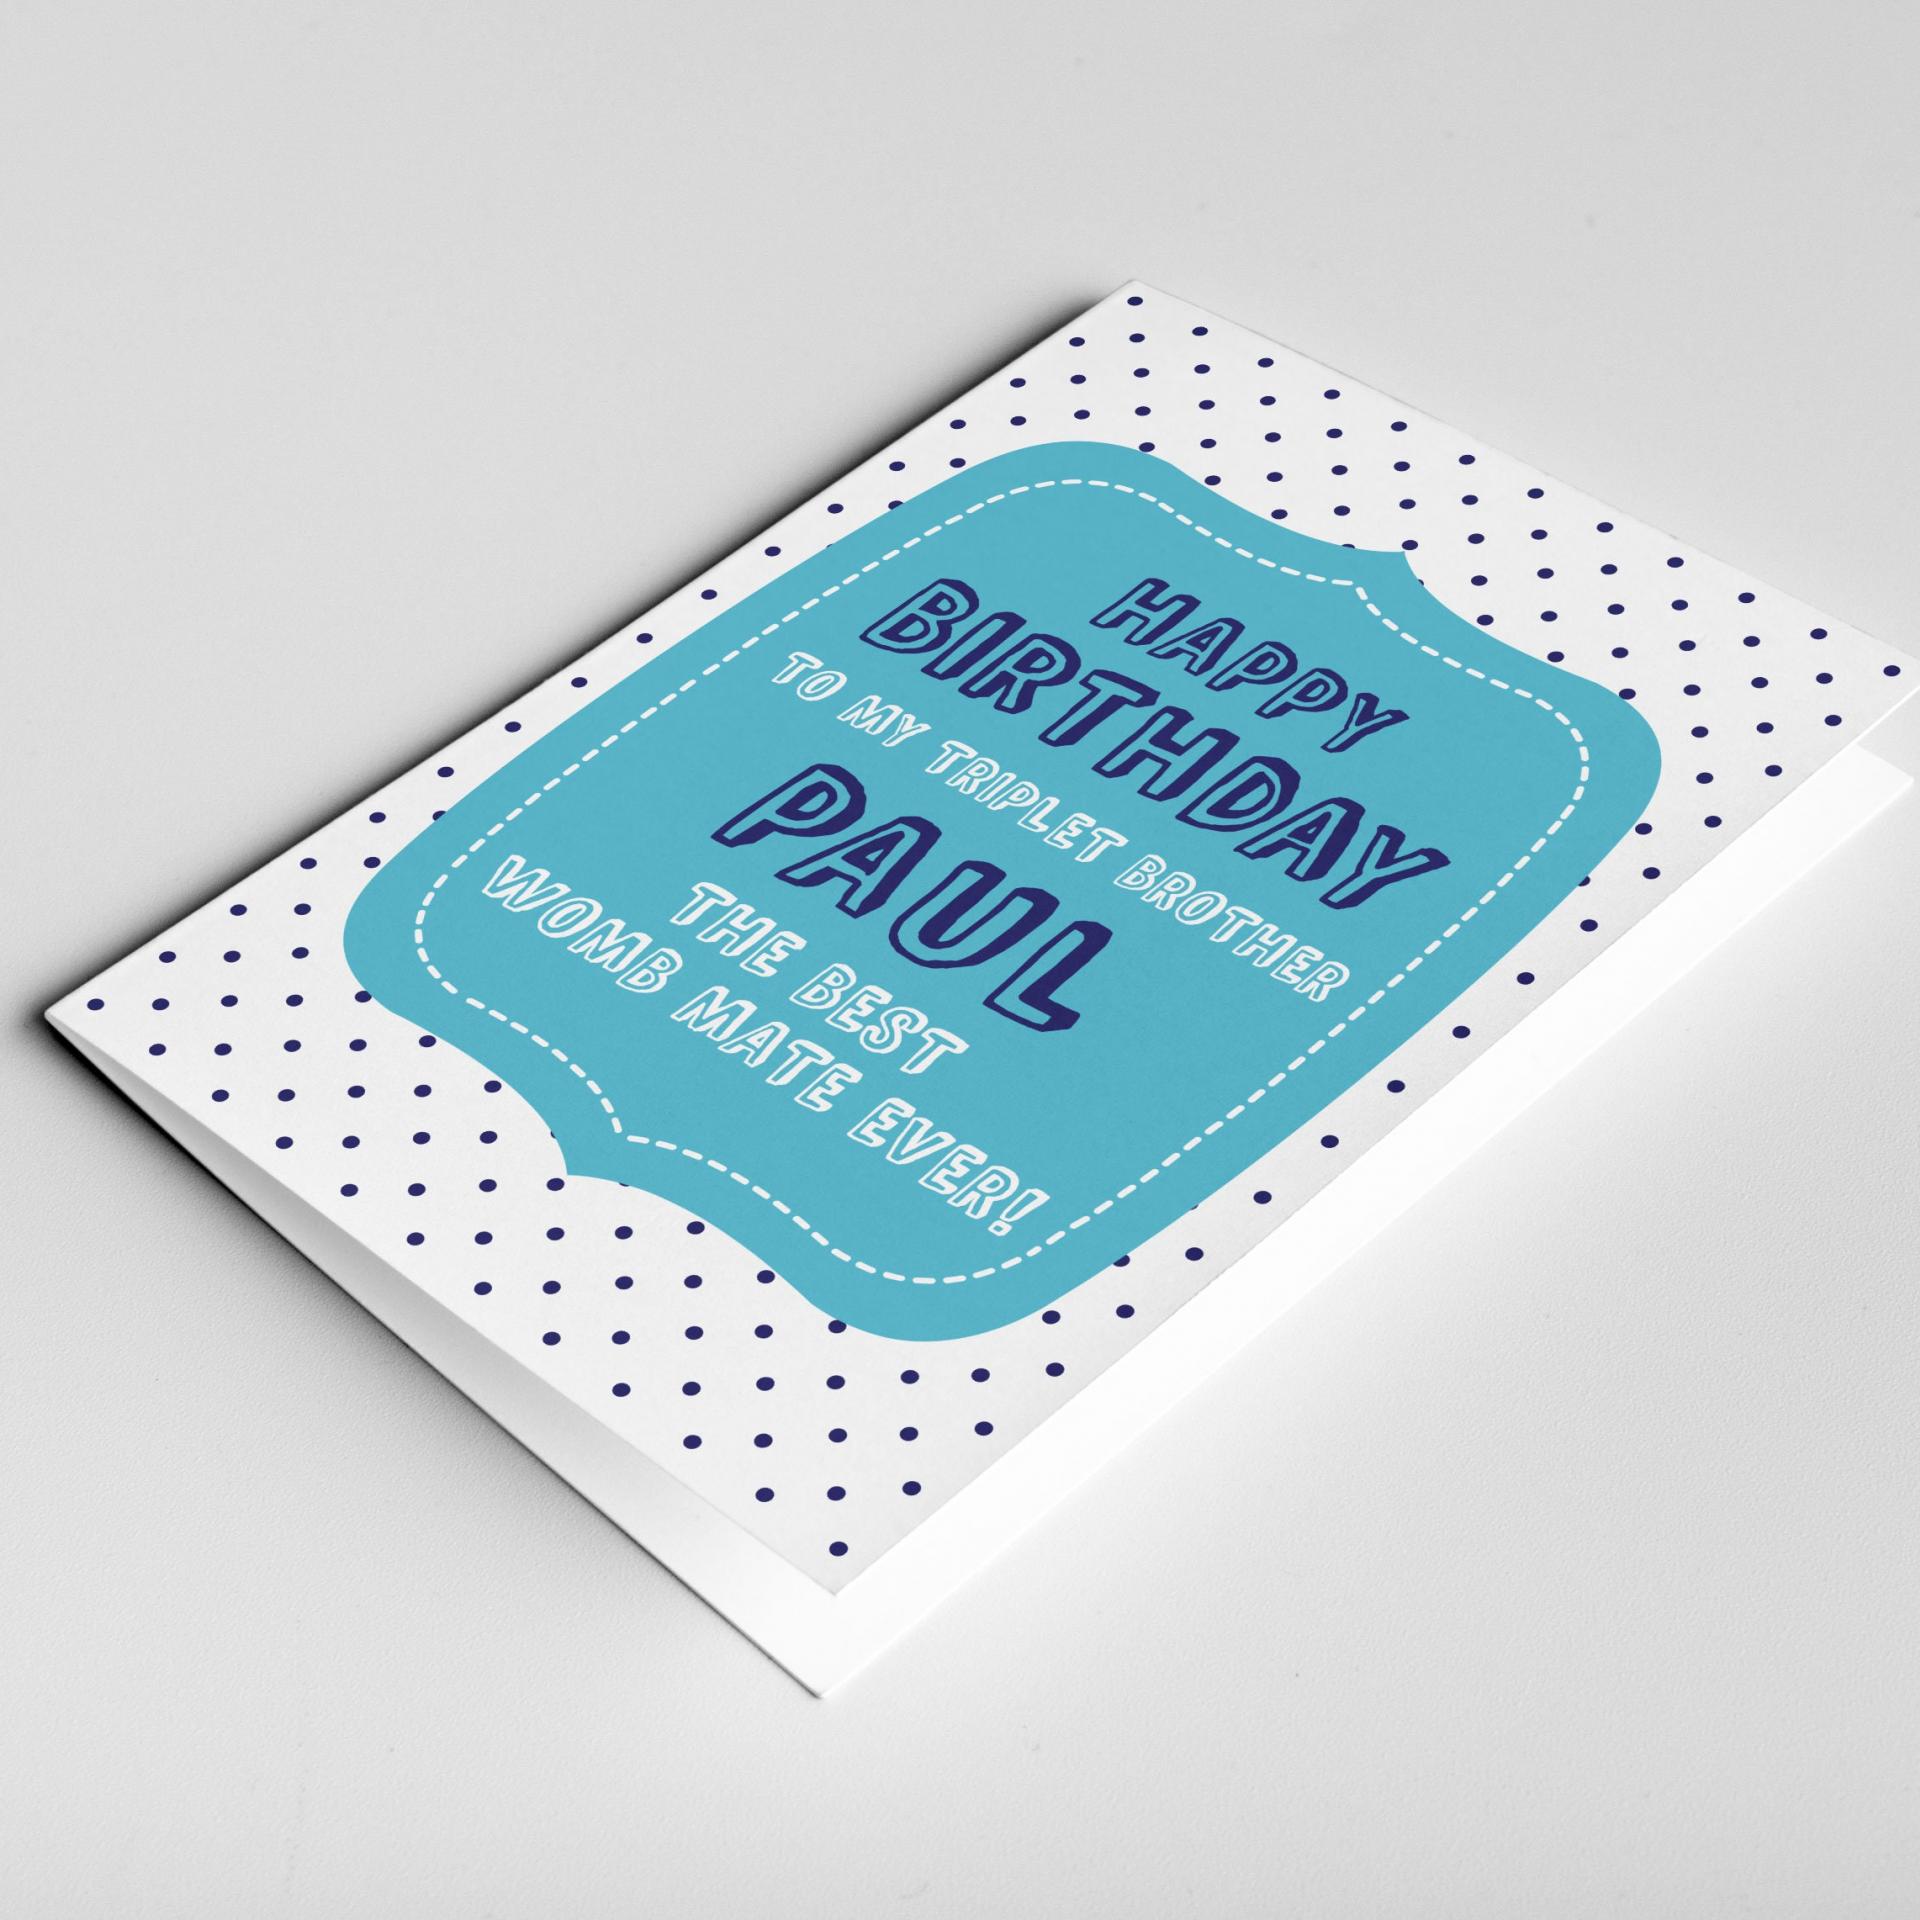 Triplet Brother Birthday Card, Triplet Brother Card, Triplet Birthday Card, Womb Mates Card, Triplets Card, Funny Triplet Card, For Triplets